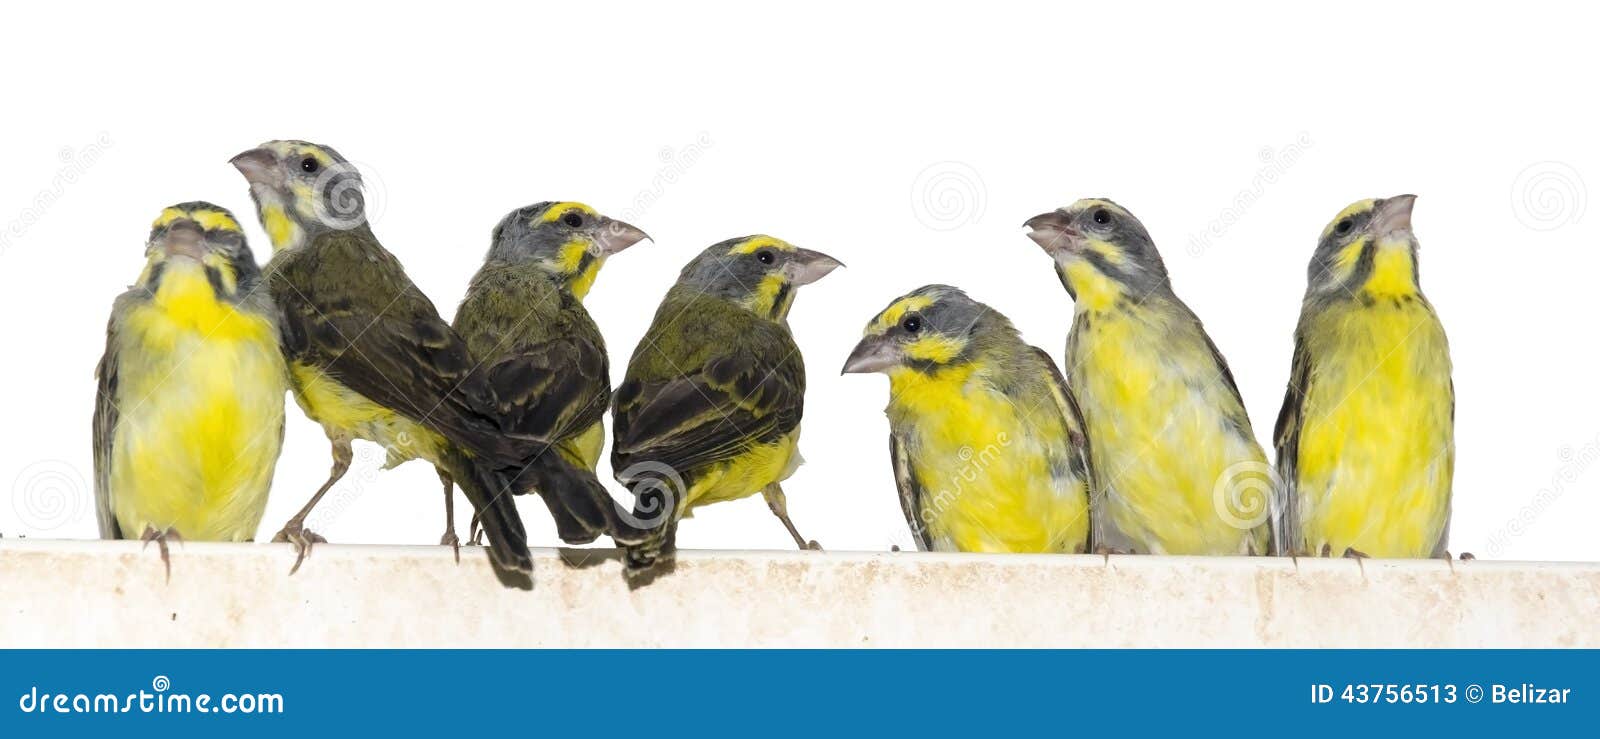 yellow-fronted canaries (crithagra mozambica)